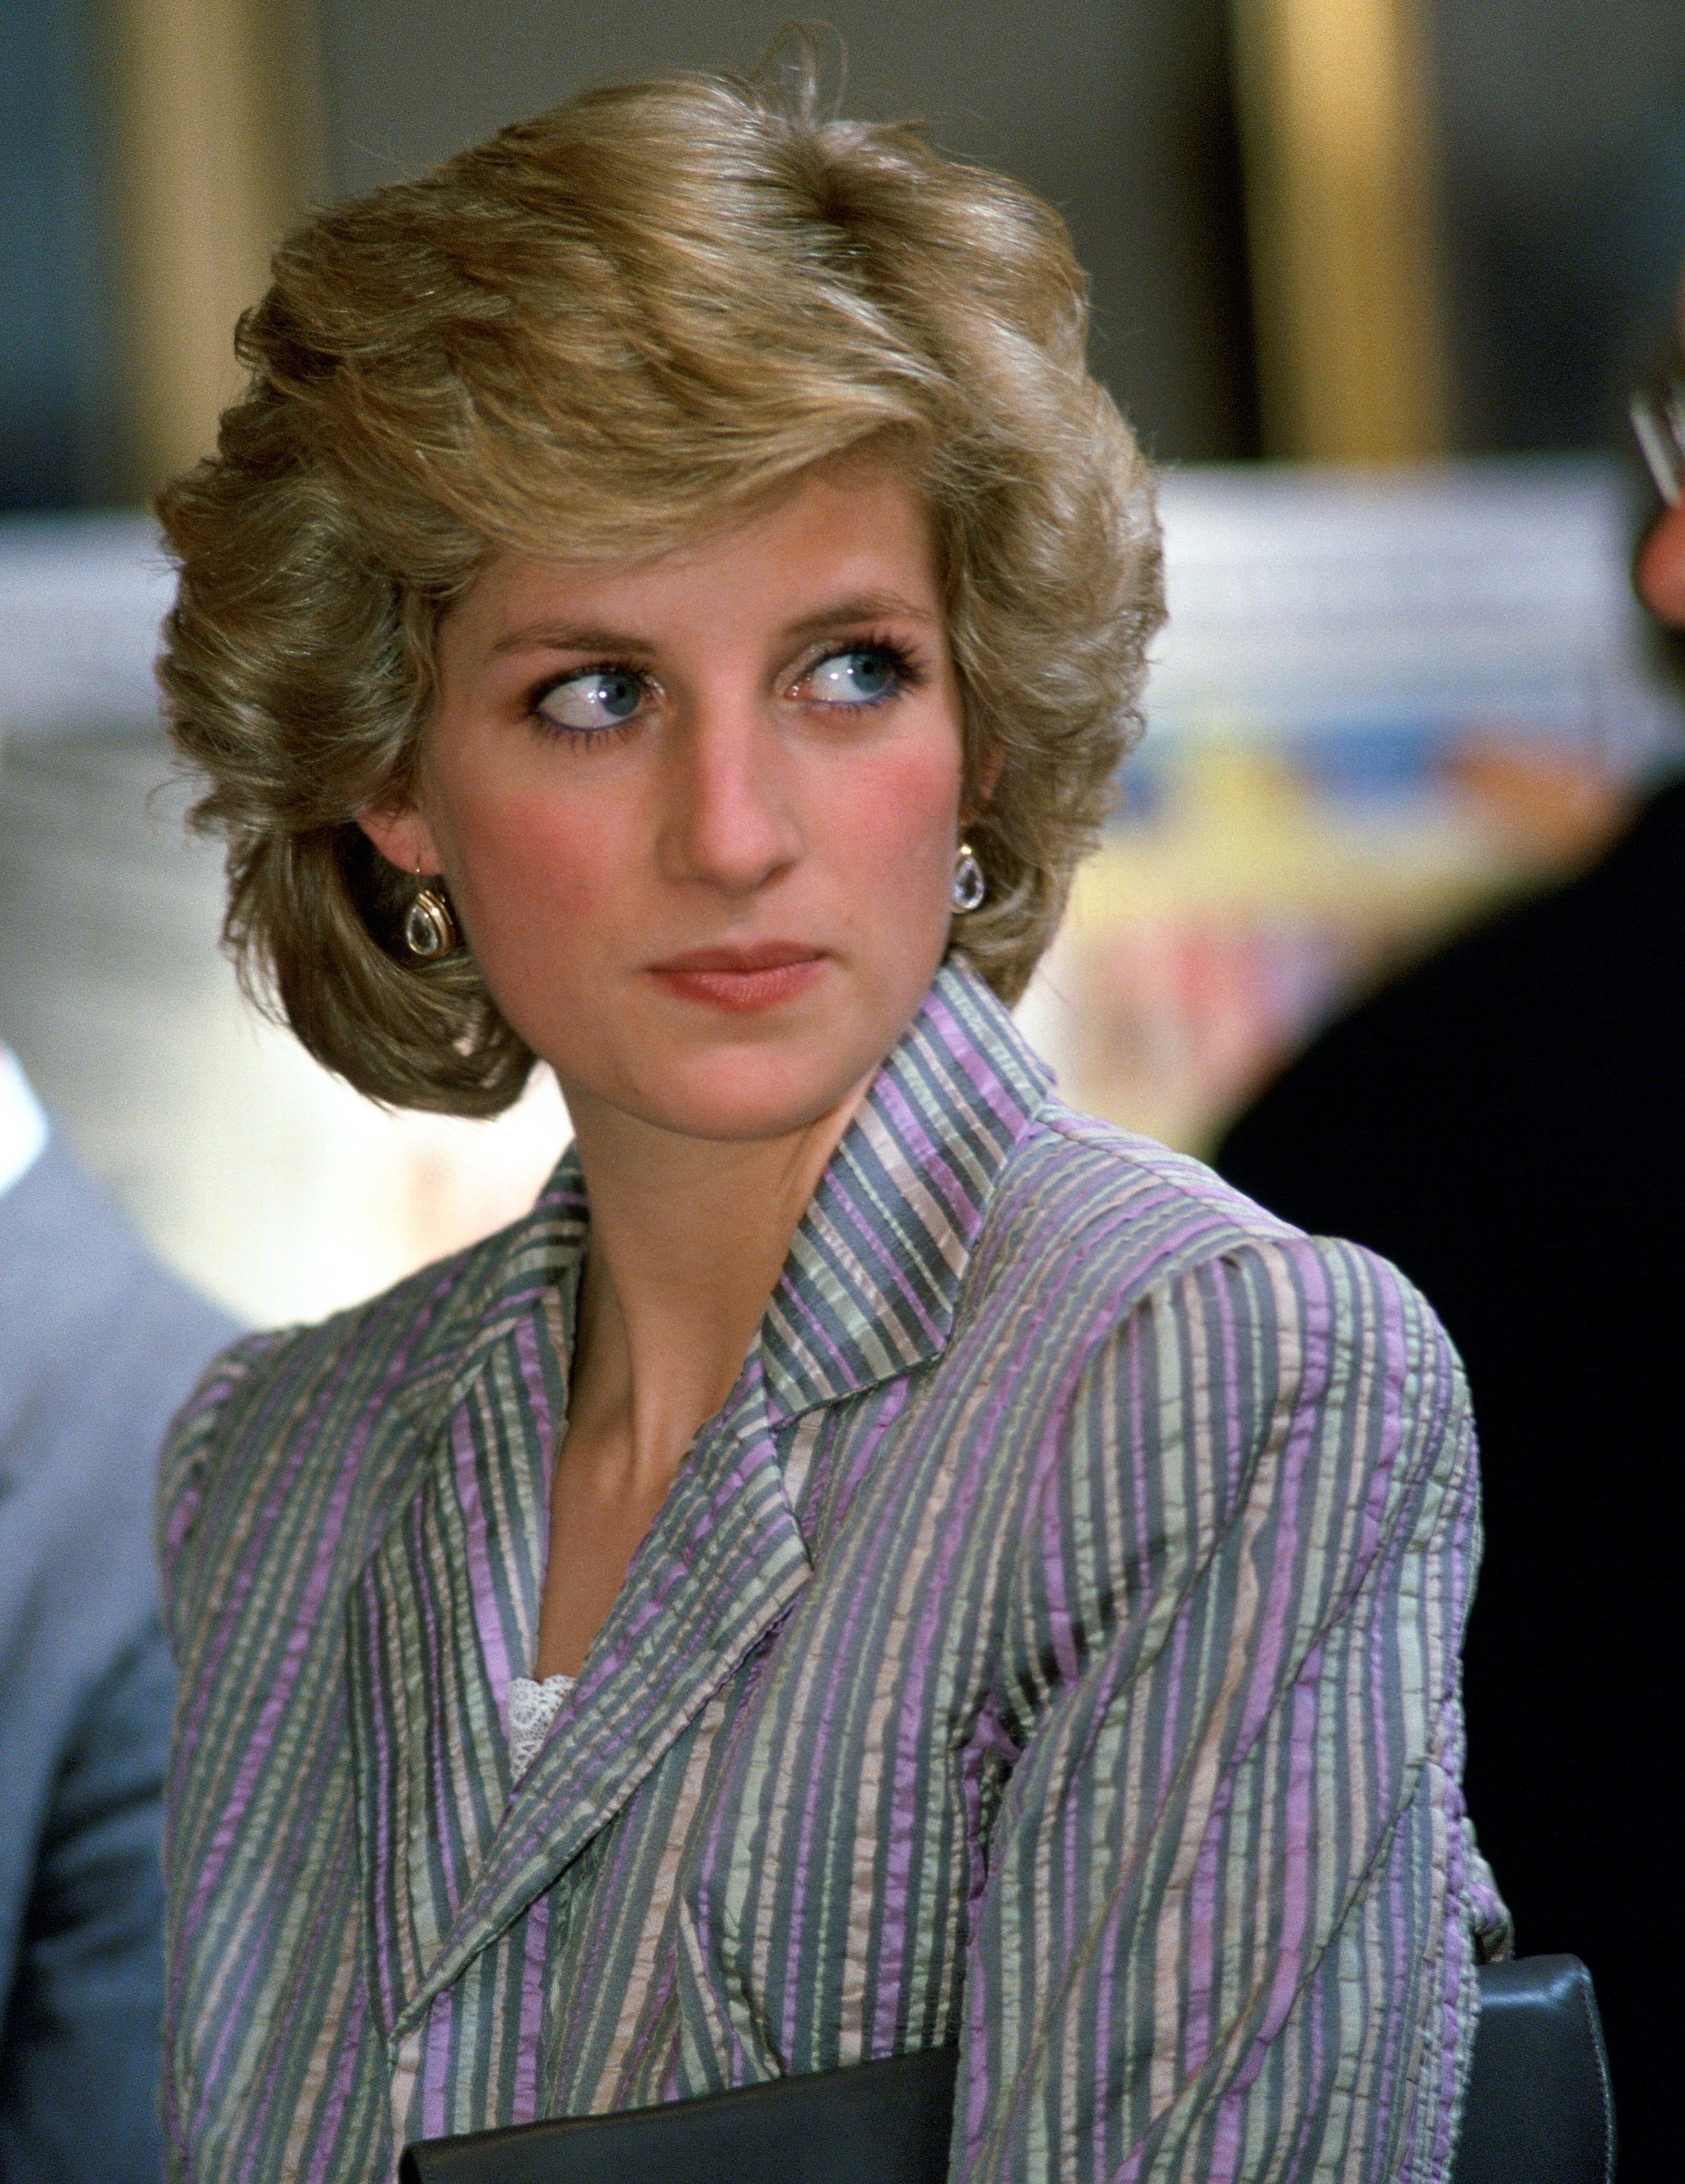 Princess Diana looking on at a royal event in an outfit designed by Bruce Oldfield